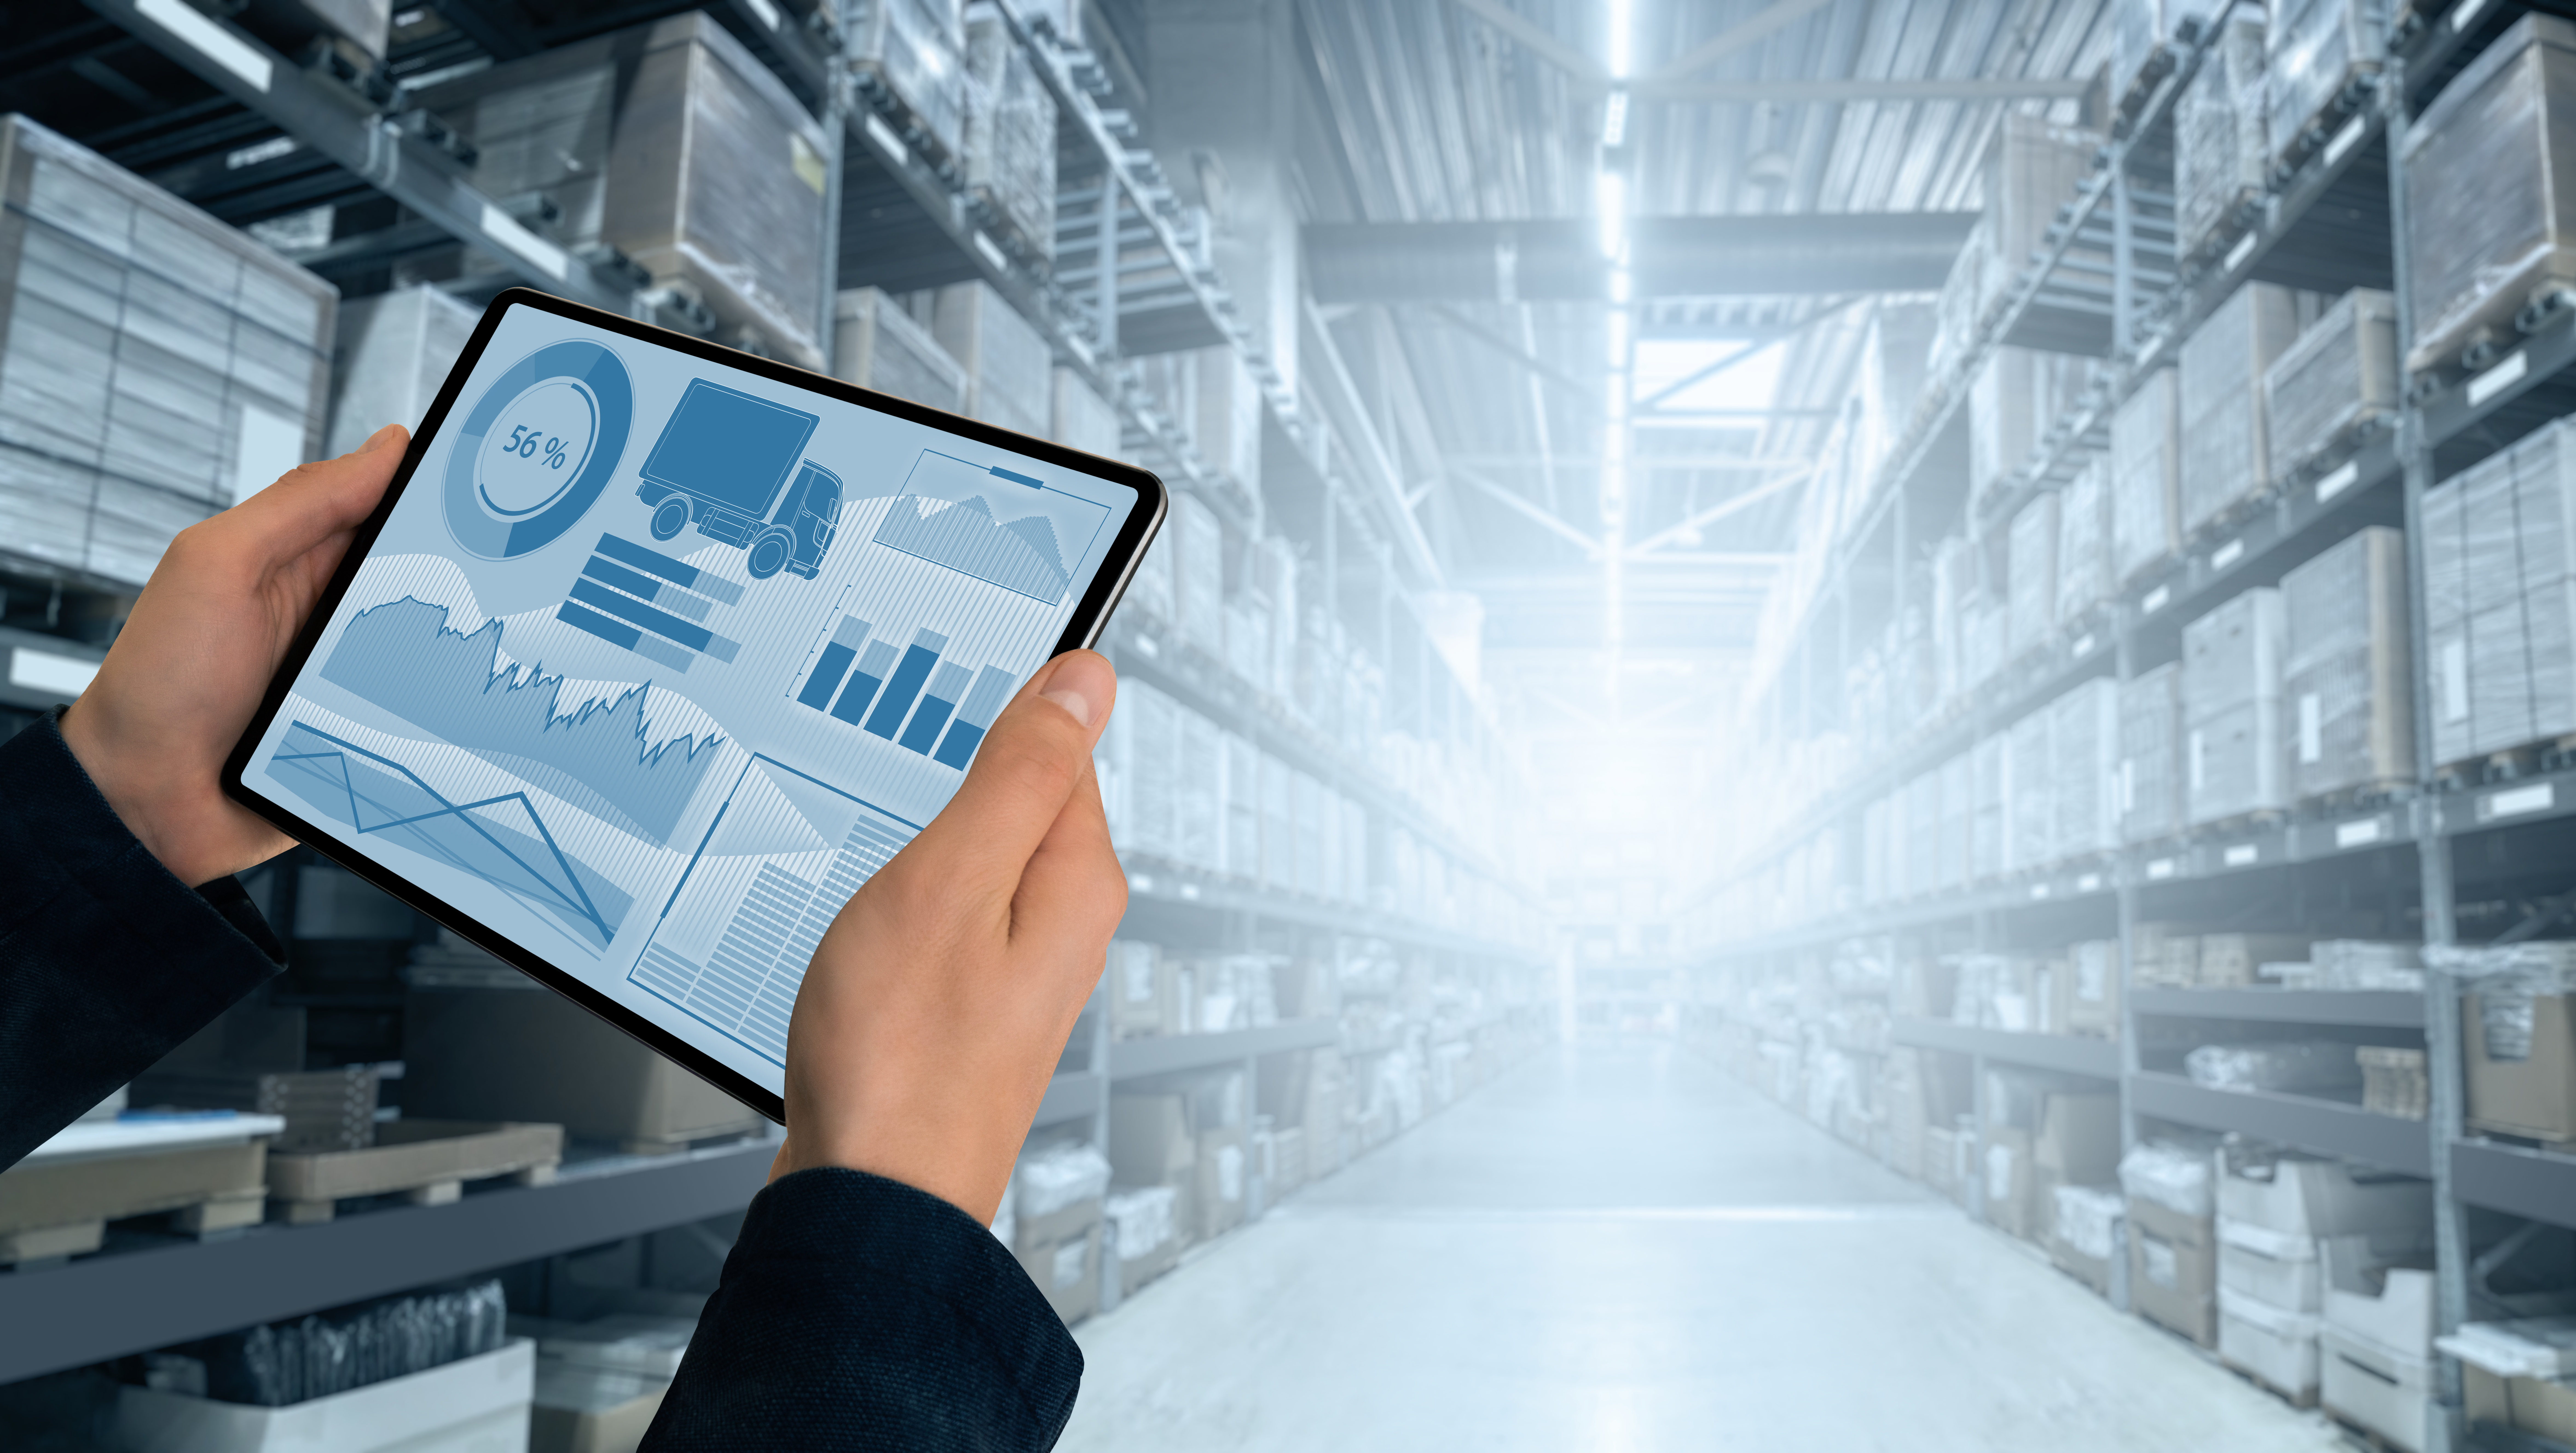 Logistics Featured Image - Warehouse with hands holding a tablet.